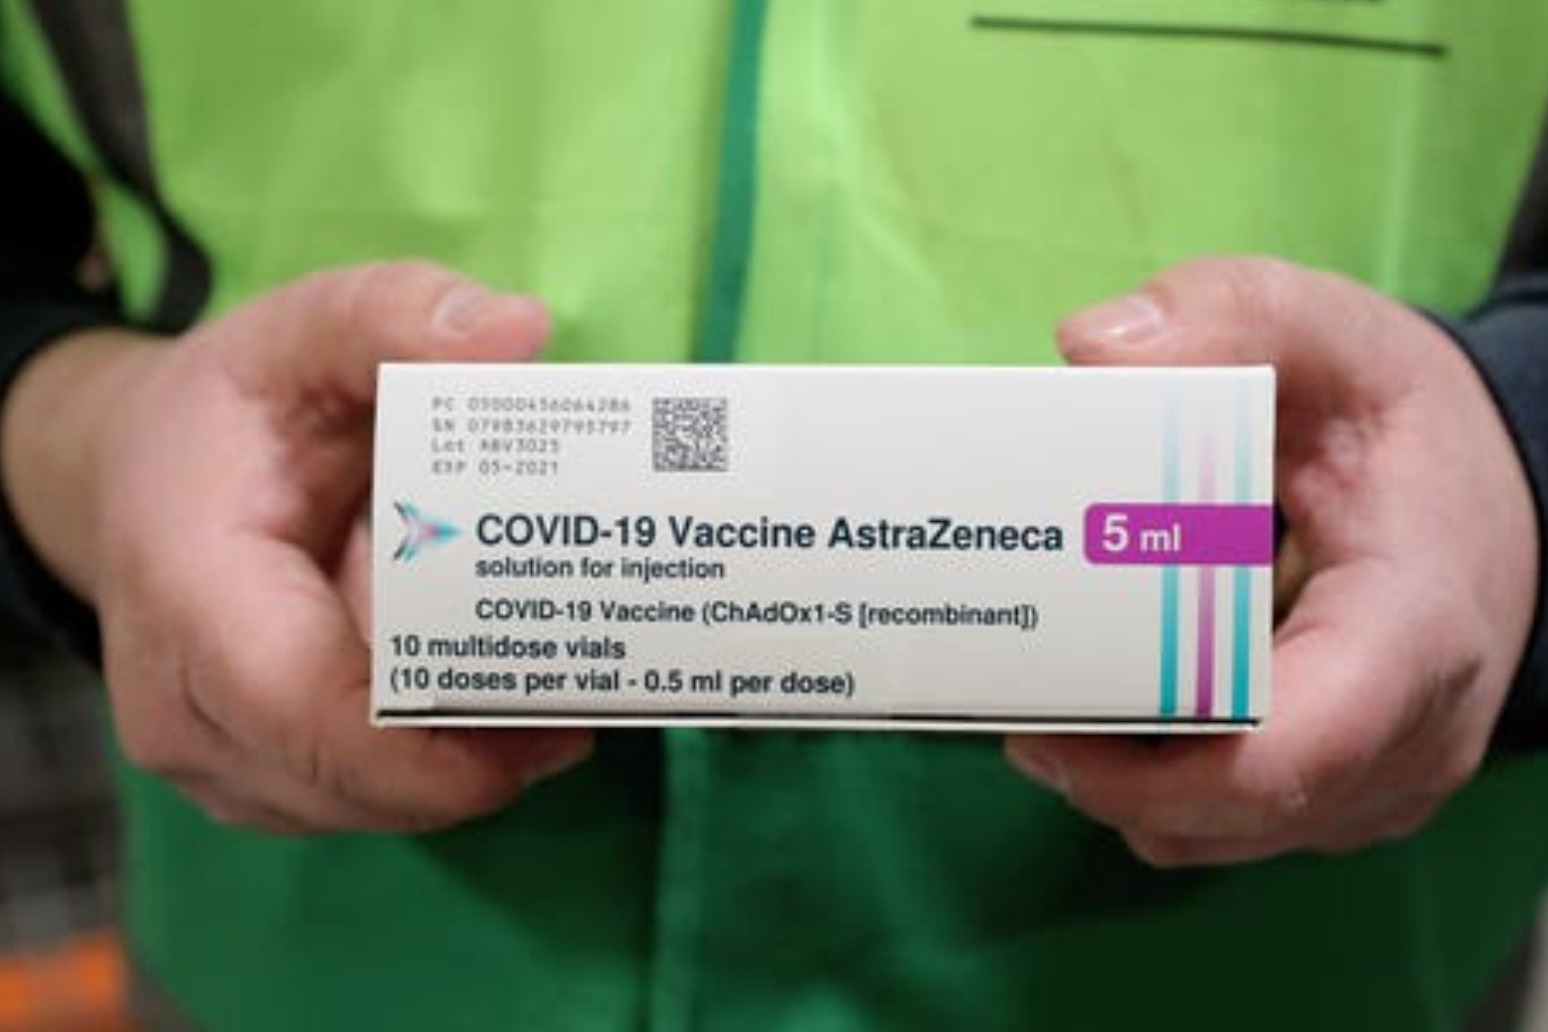 Canada’s most populous province says seniors will not get AstraZeneca vaccine 